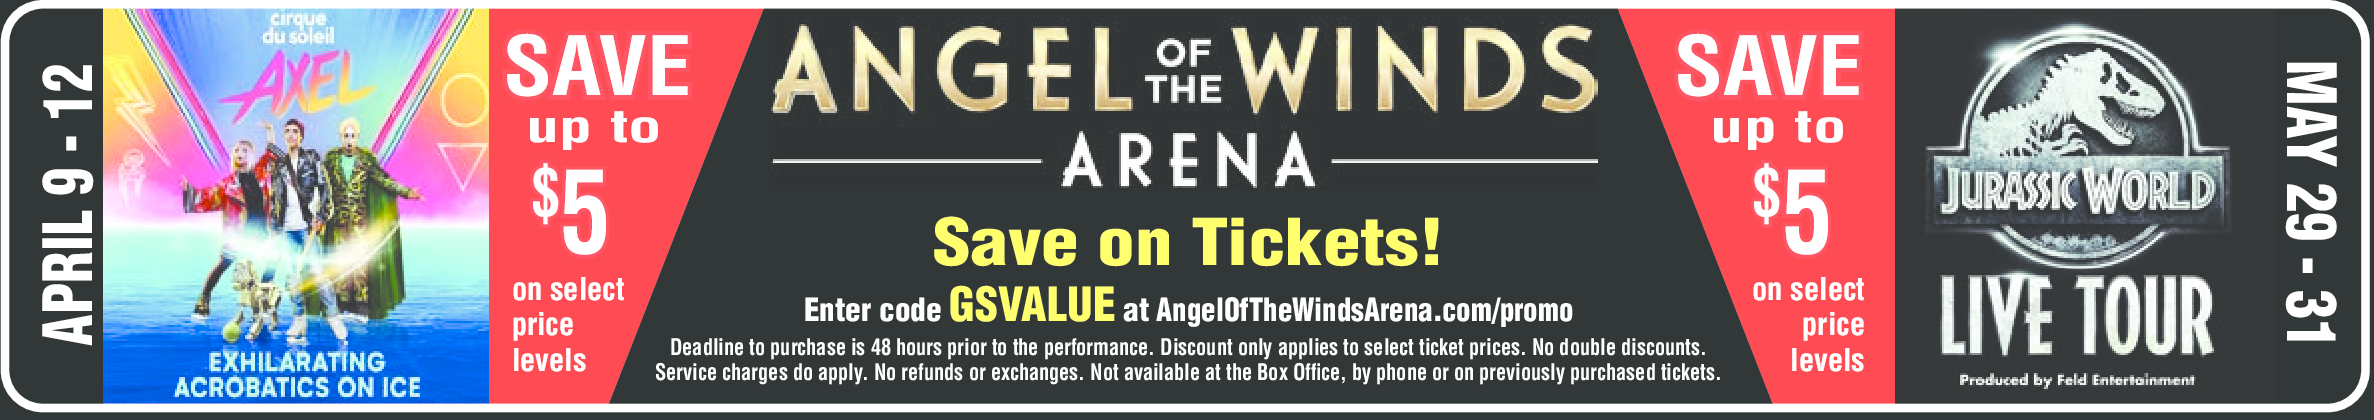 Angel Of The Winds Arena Coupons